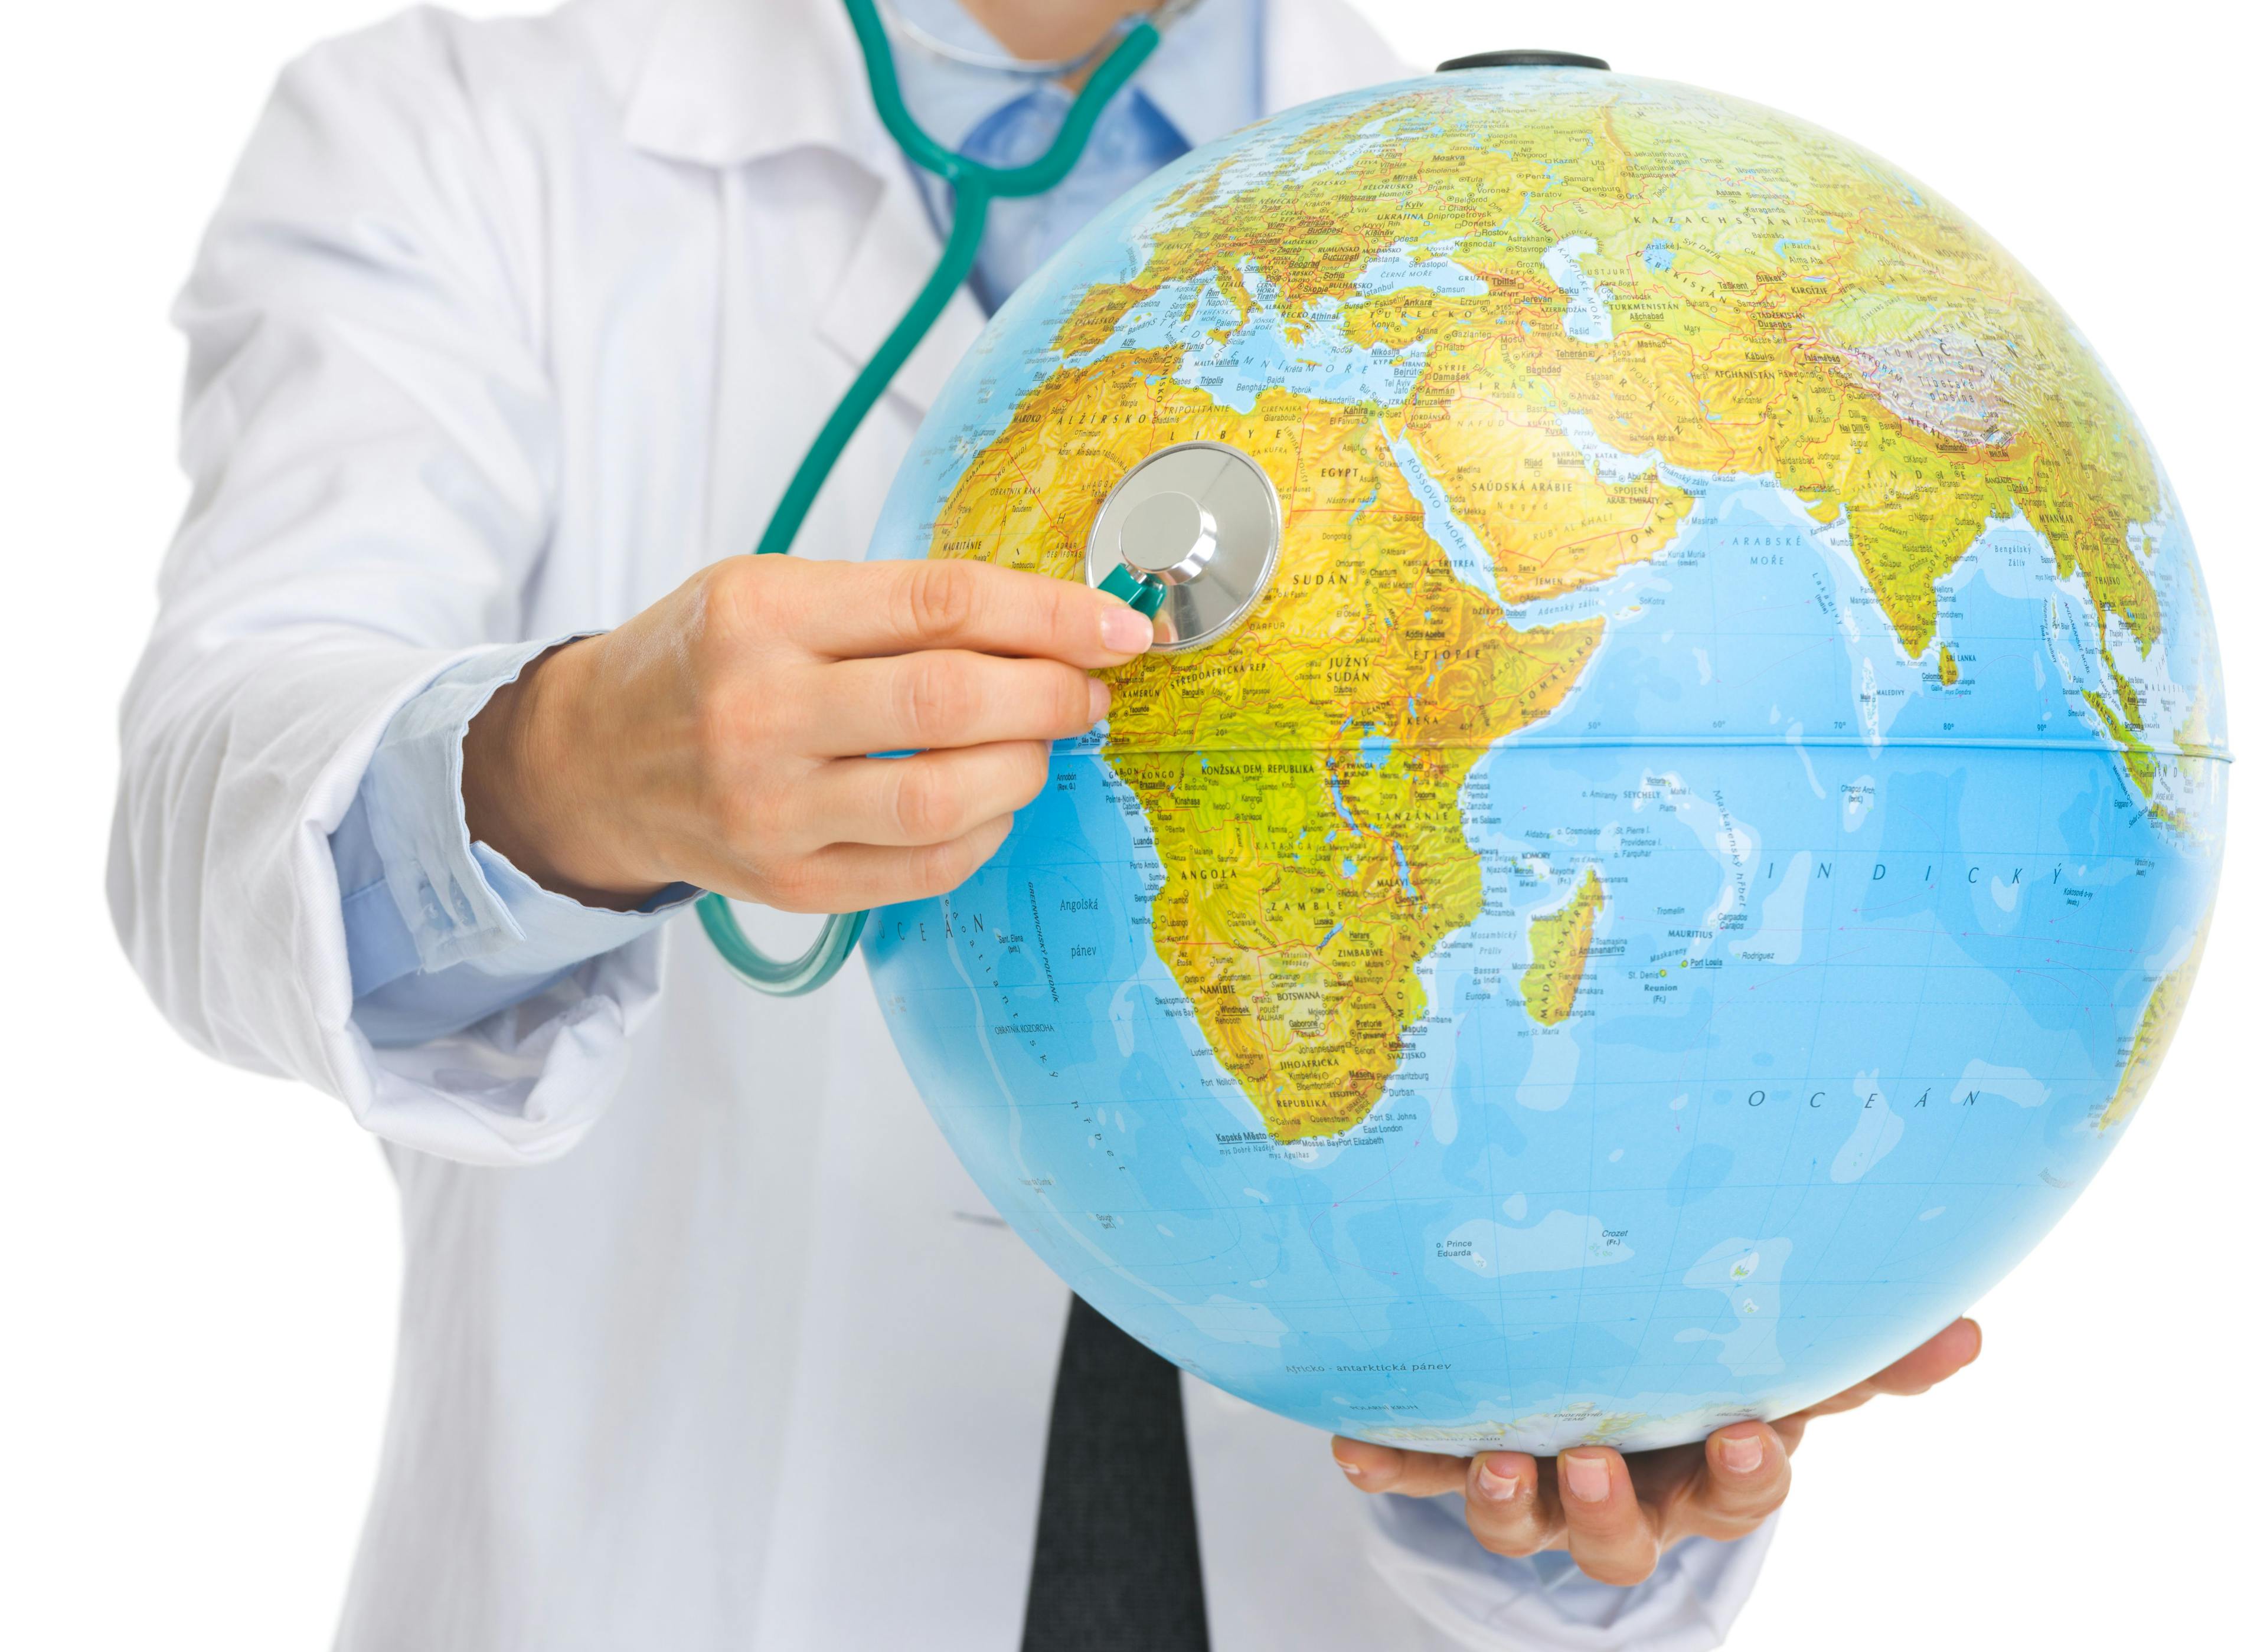 locum tenens, physicians, traveling physician, practice expansion